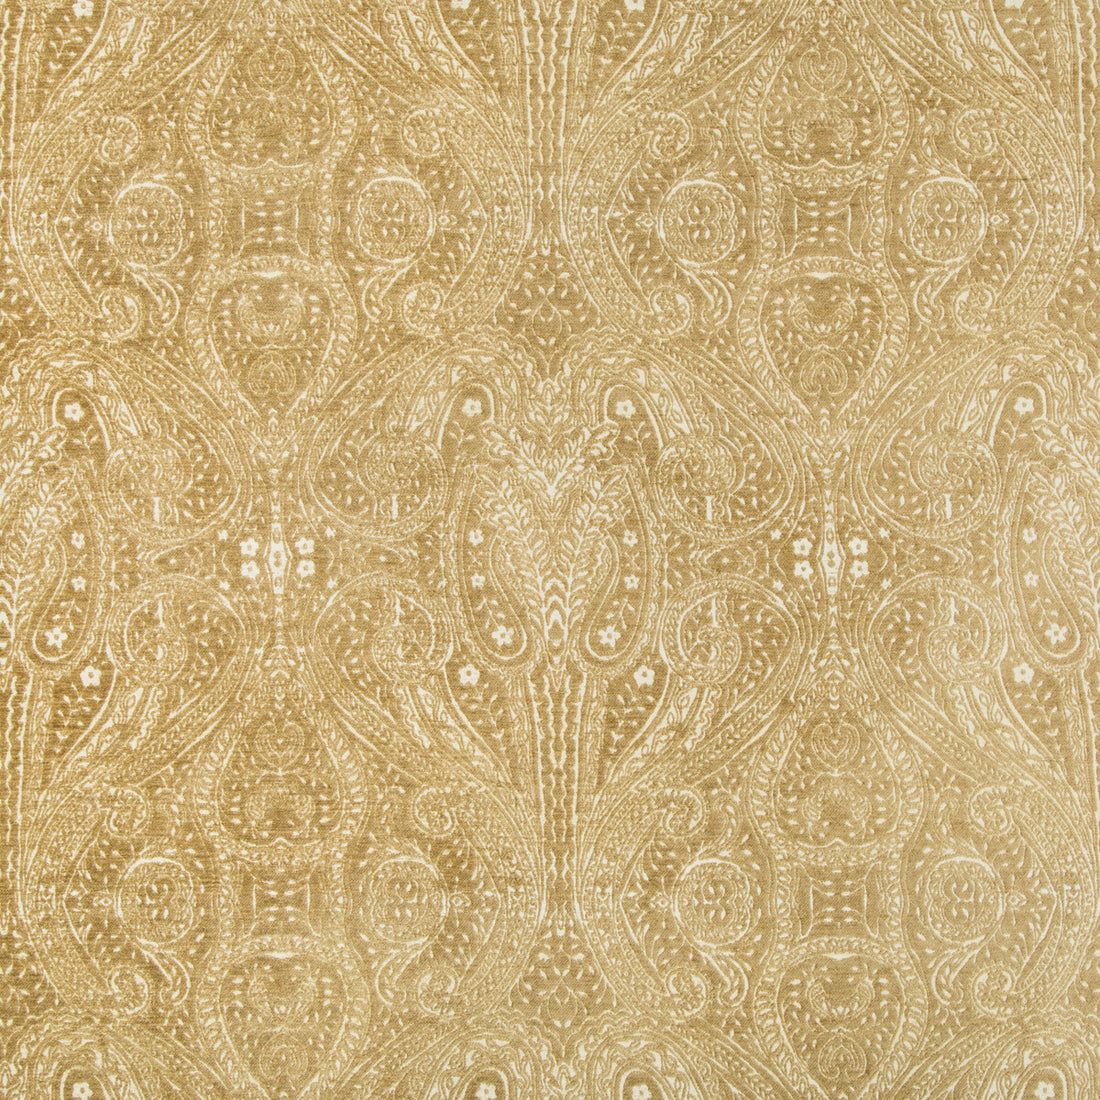 Kravet Contract fabric in 34767-416 color - pattern 34767.416.0 - by Kravet Contract in the Gis collection